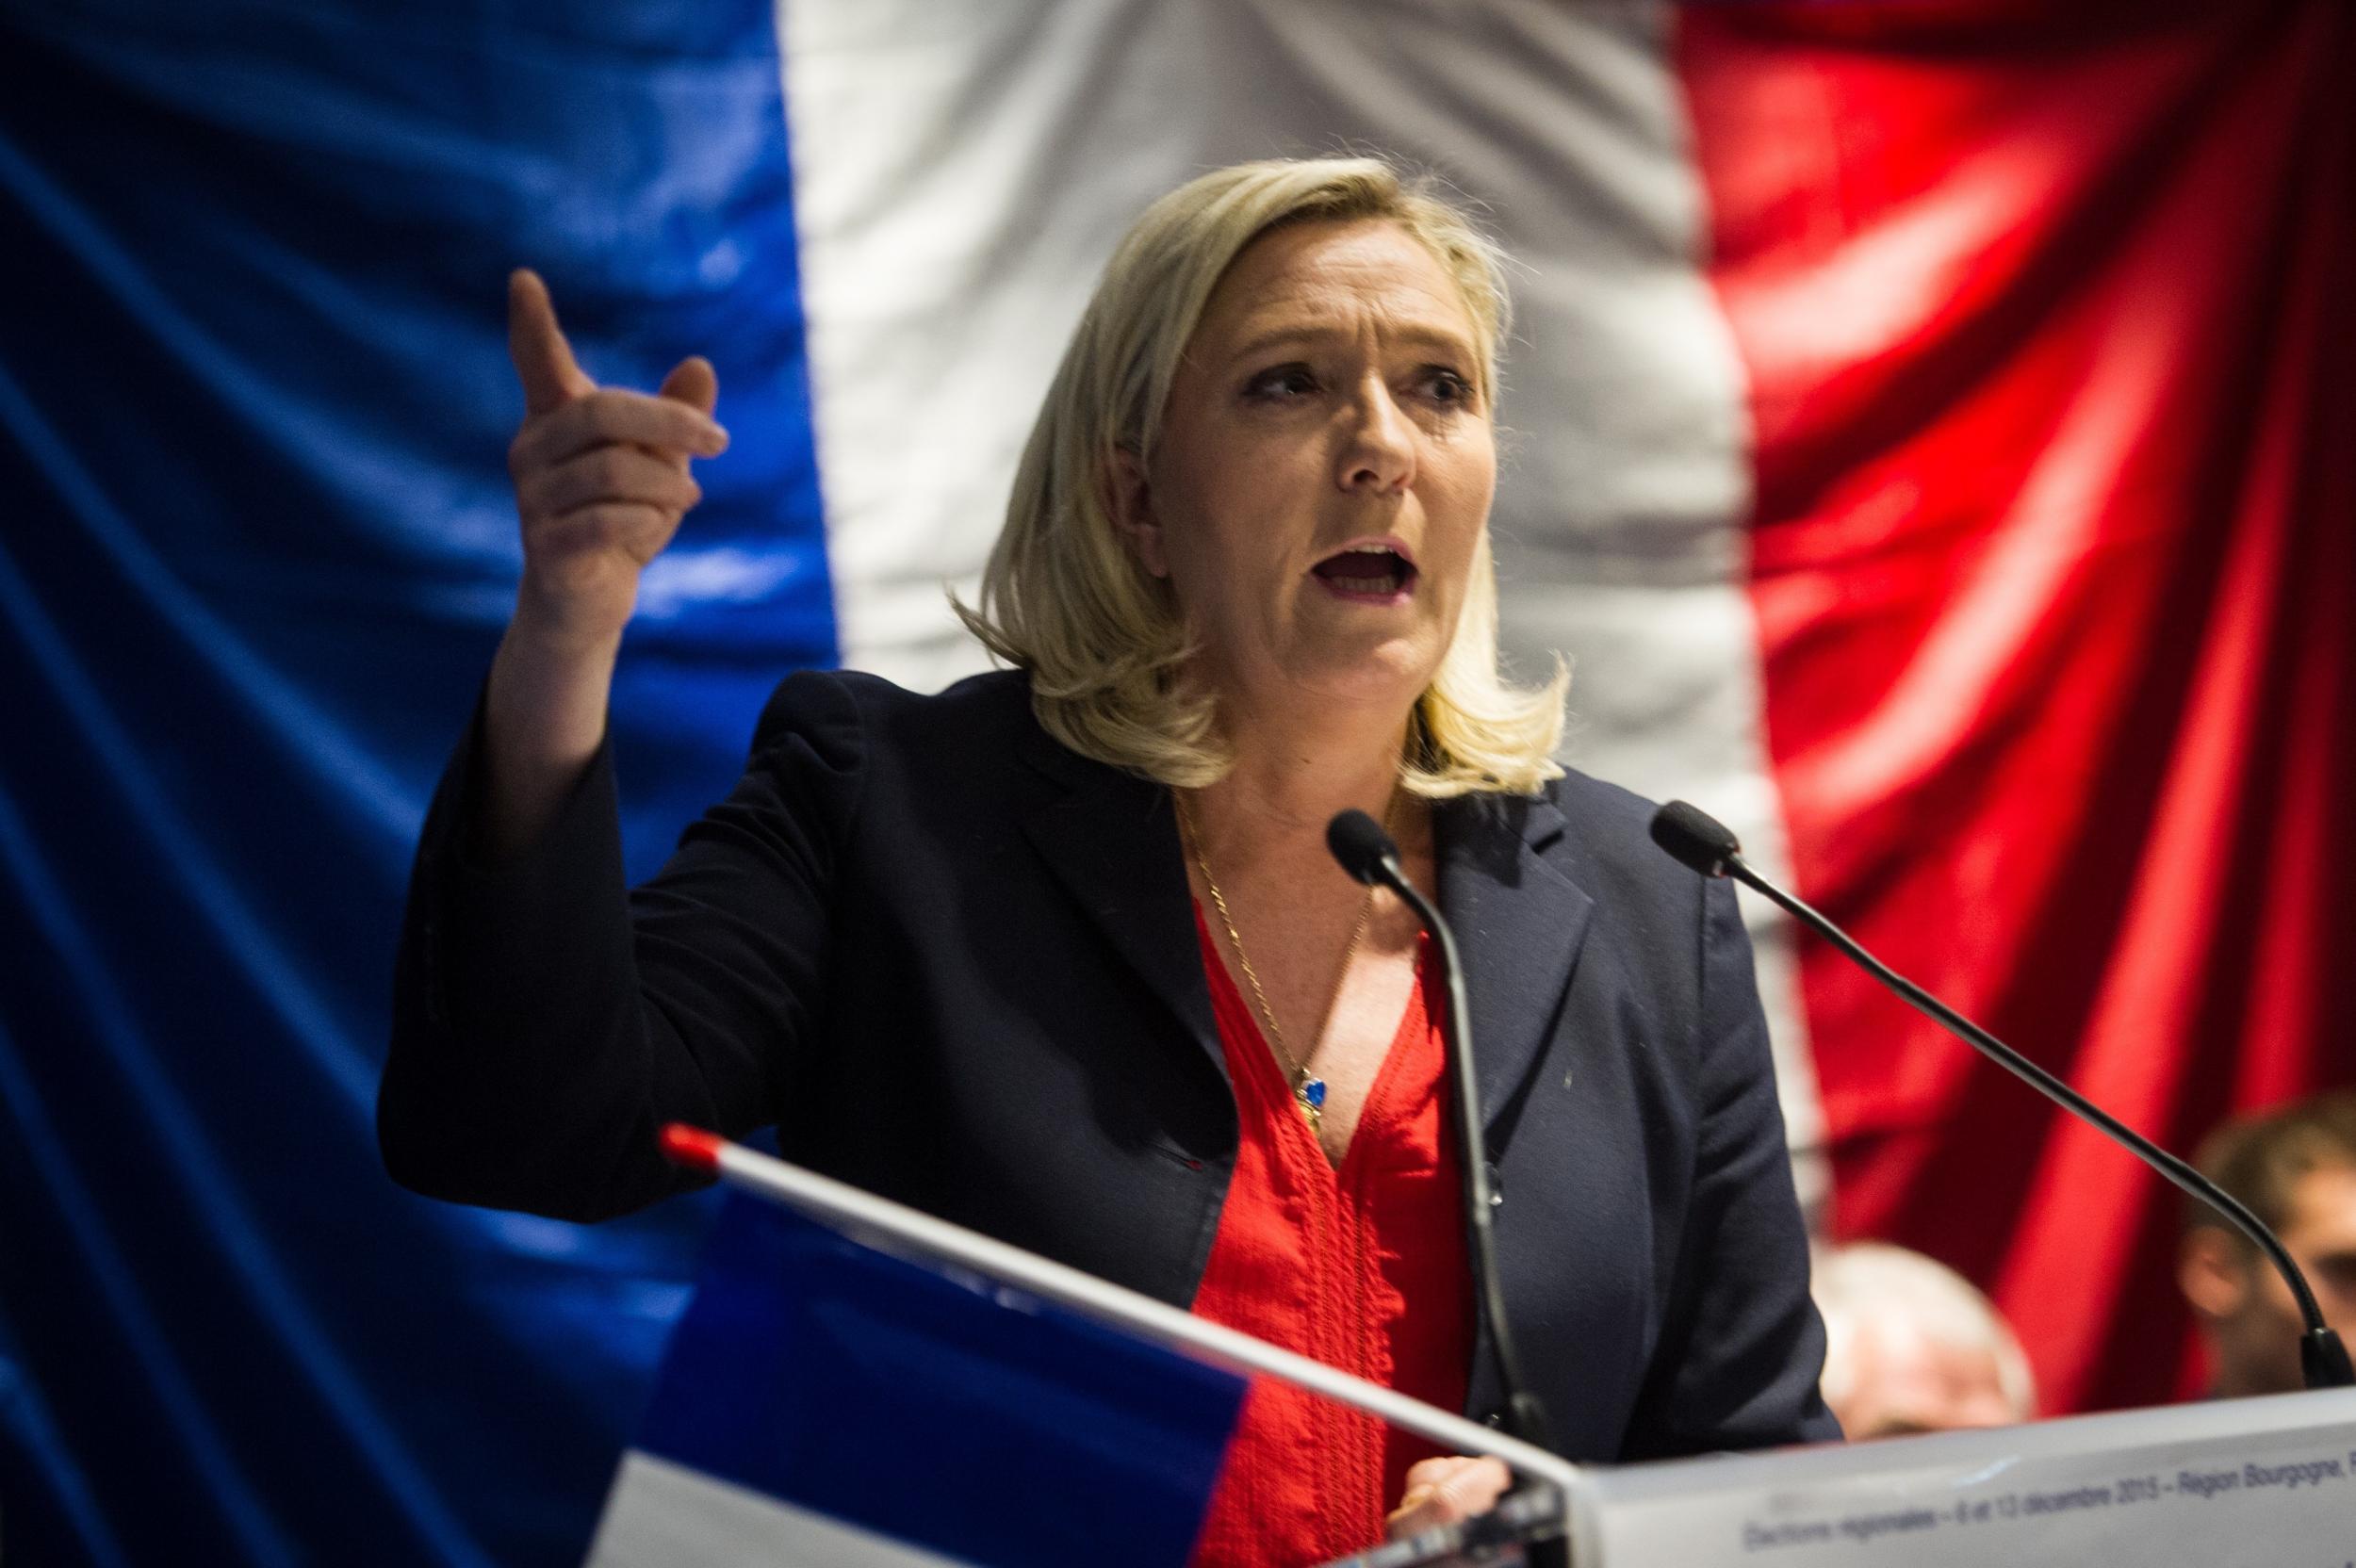 EU’s Nightmare Year Ends With Le Pen Risk Haunting Investors